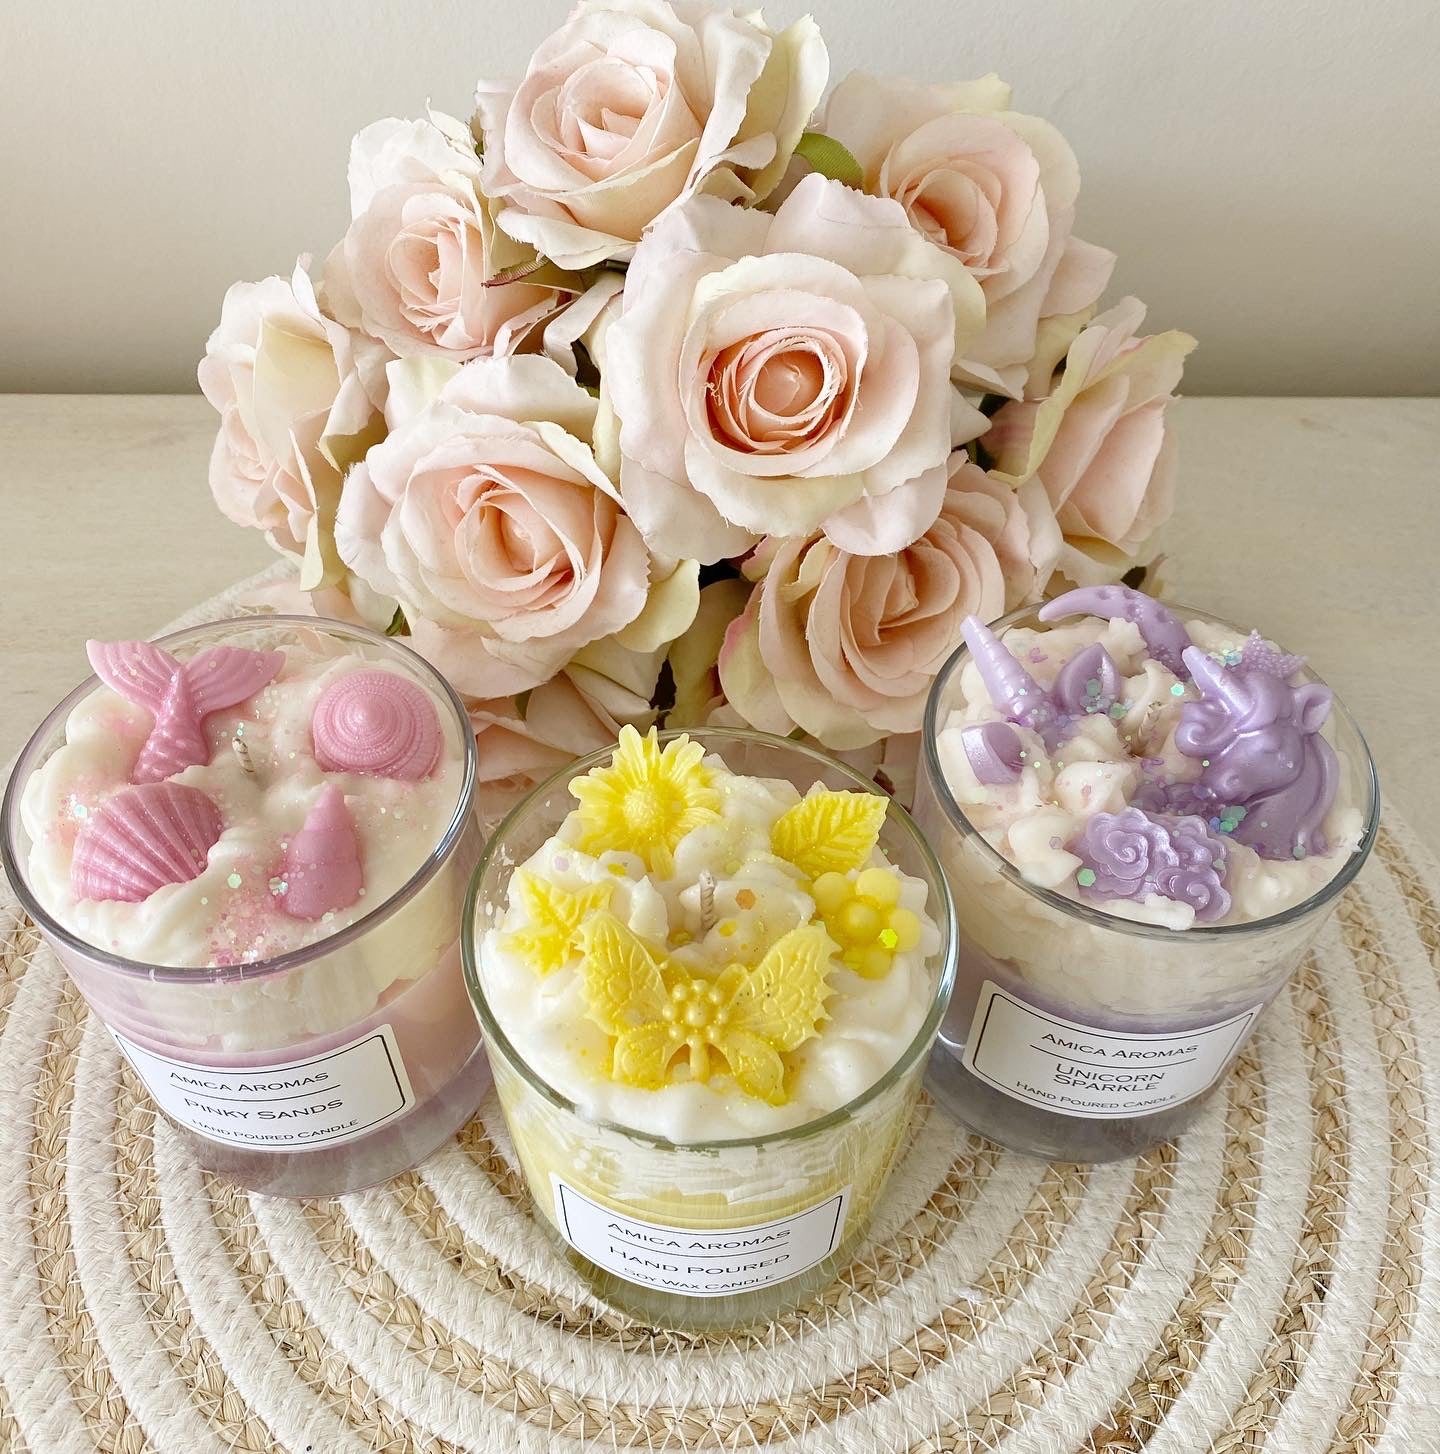 Whipped Candles